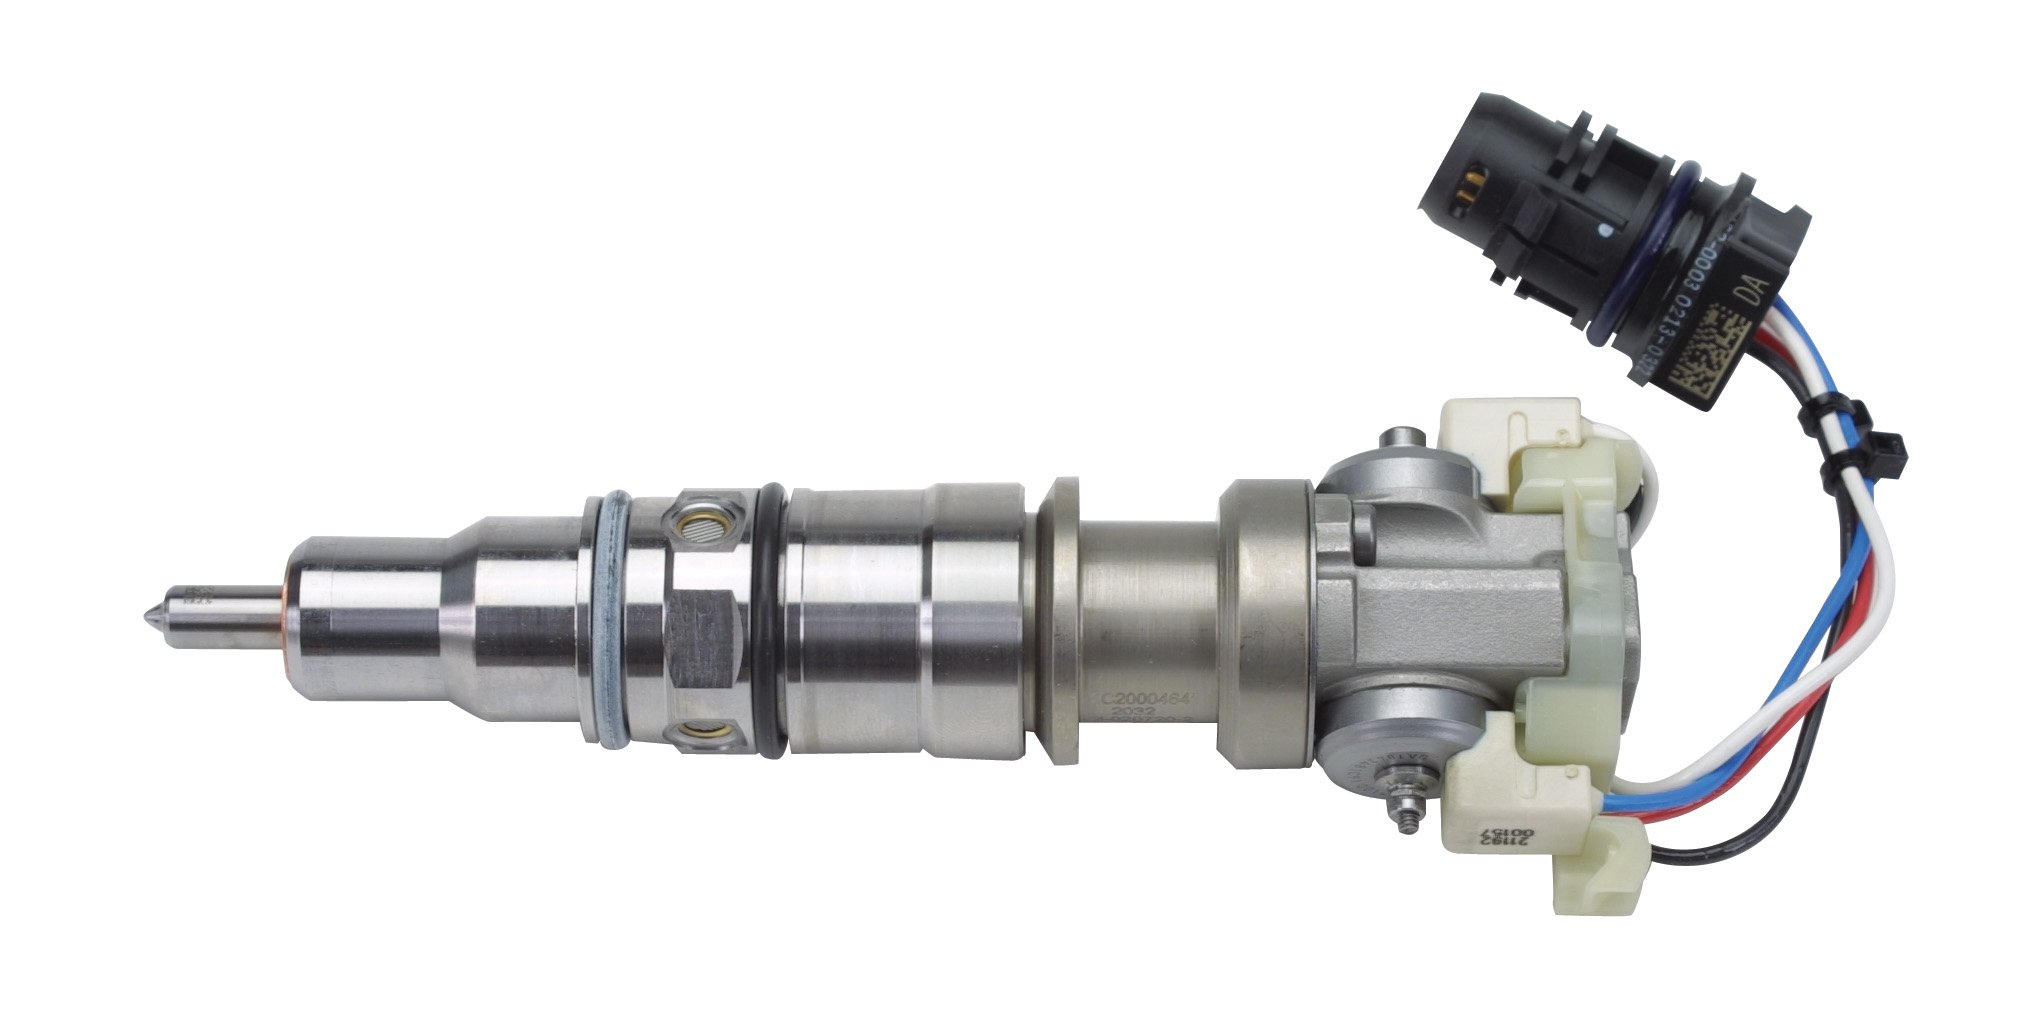 Diamond Advantage Has Fulfilled Diesel Injector Shortage And More